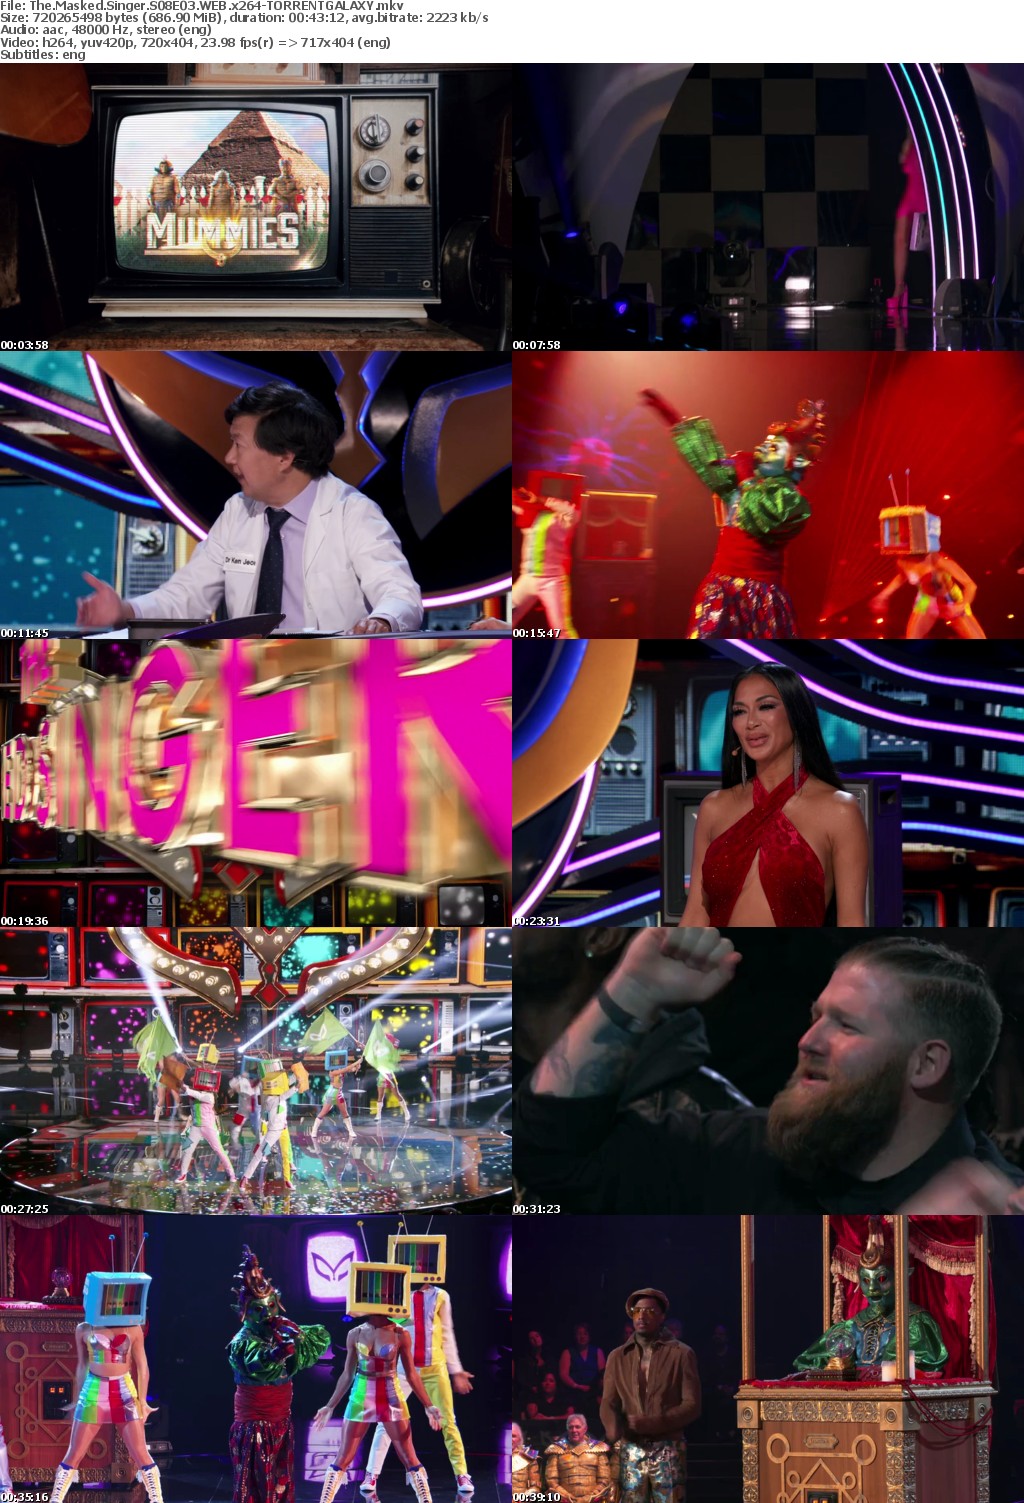 The Masked Singer S08E03 WEB x264-GALAXY